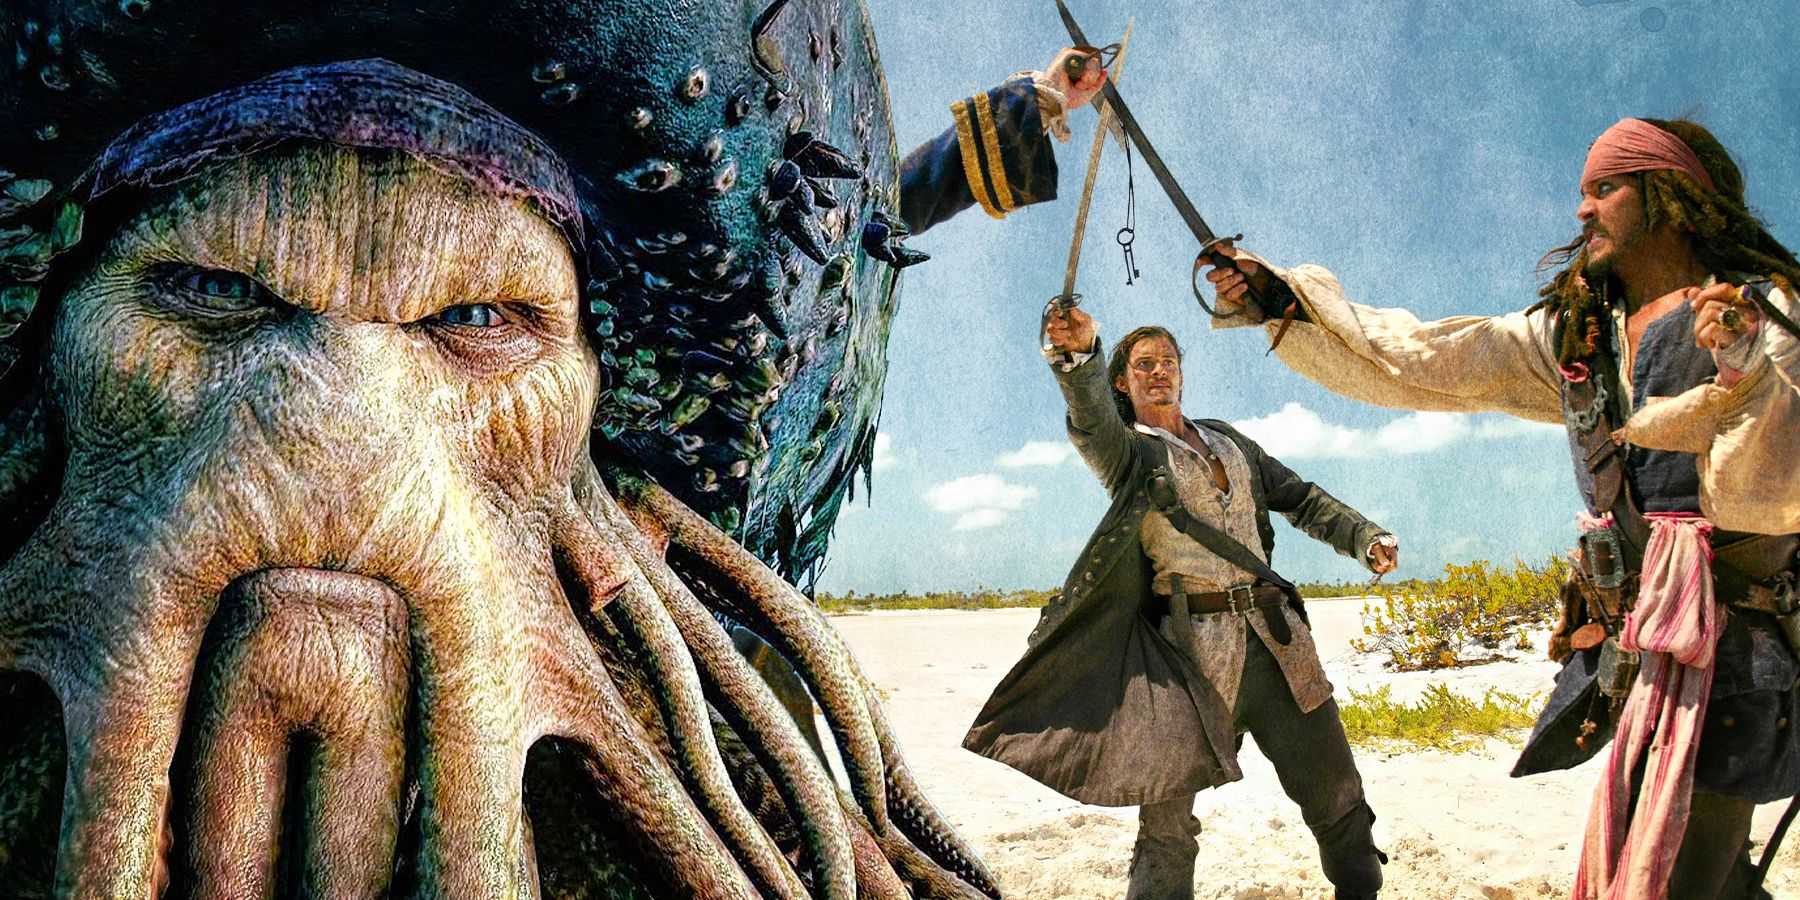 How to Watch the Pirates of the Caribbean Movies in Chronological Order -  IGN